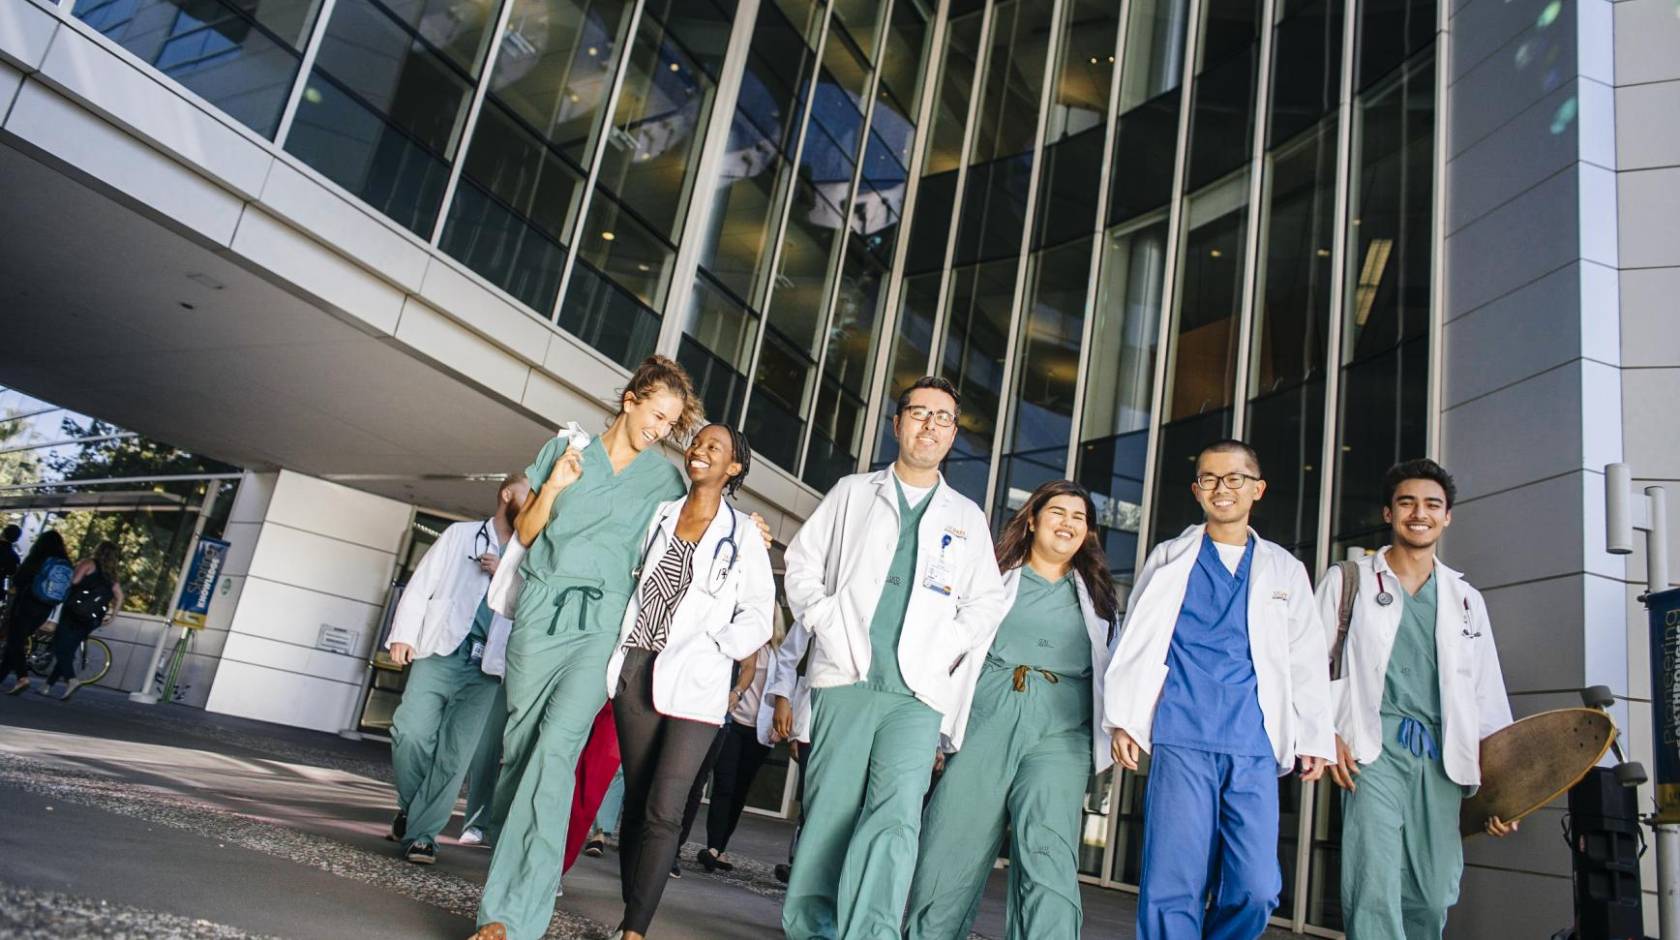 University of California Health students leaving a building together in scrubs